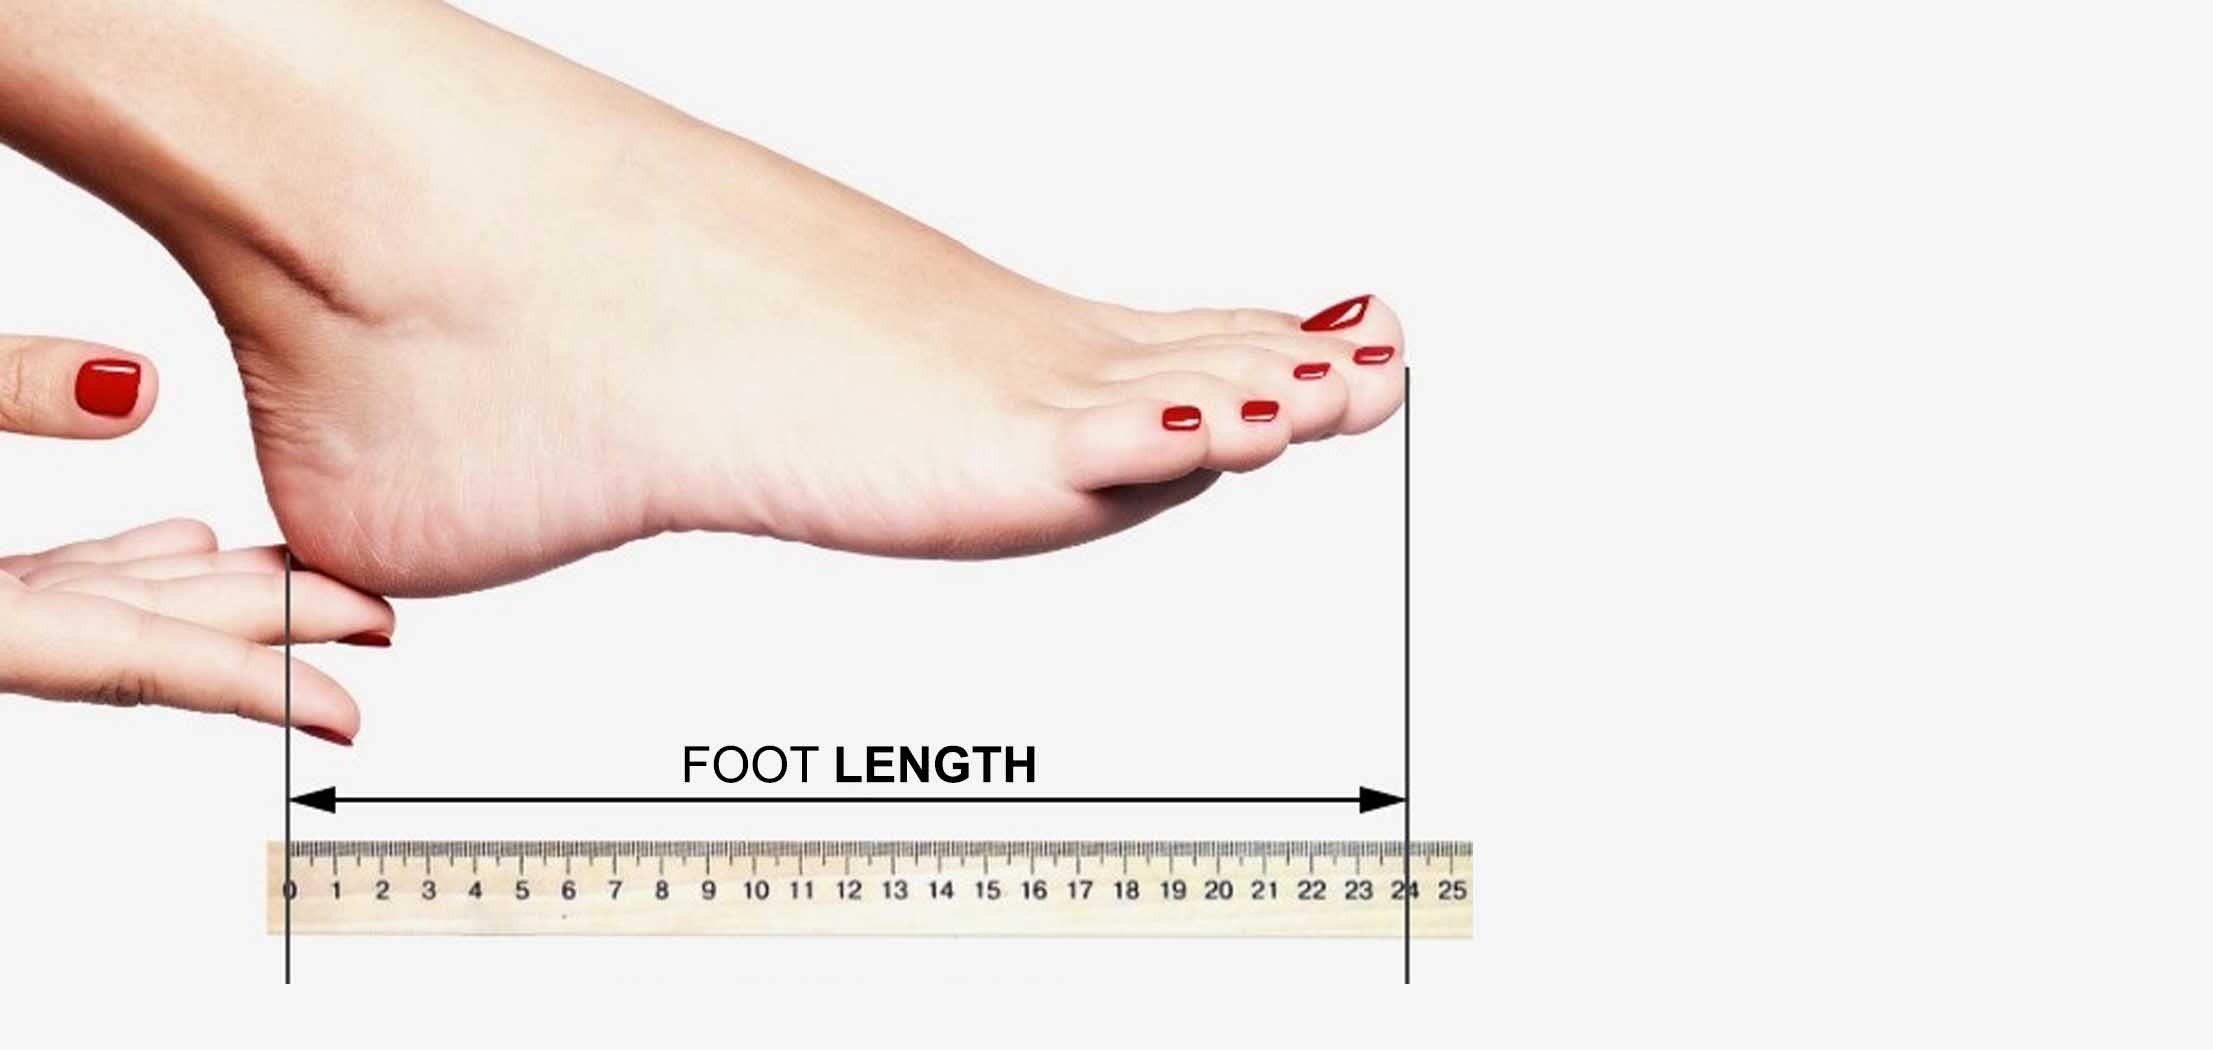 24 cm in foot size. 